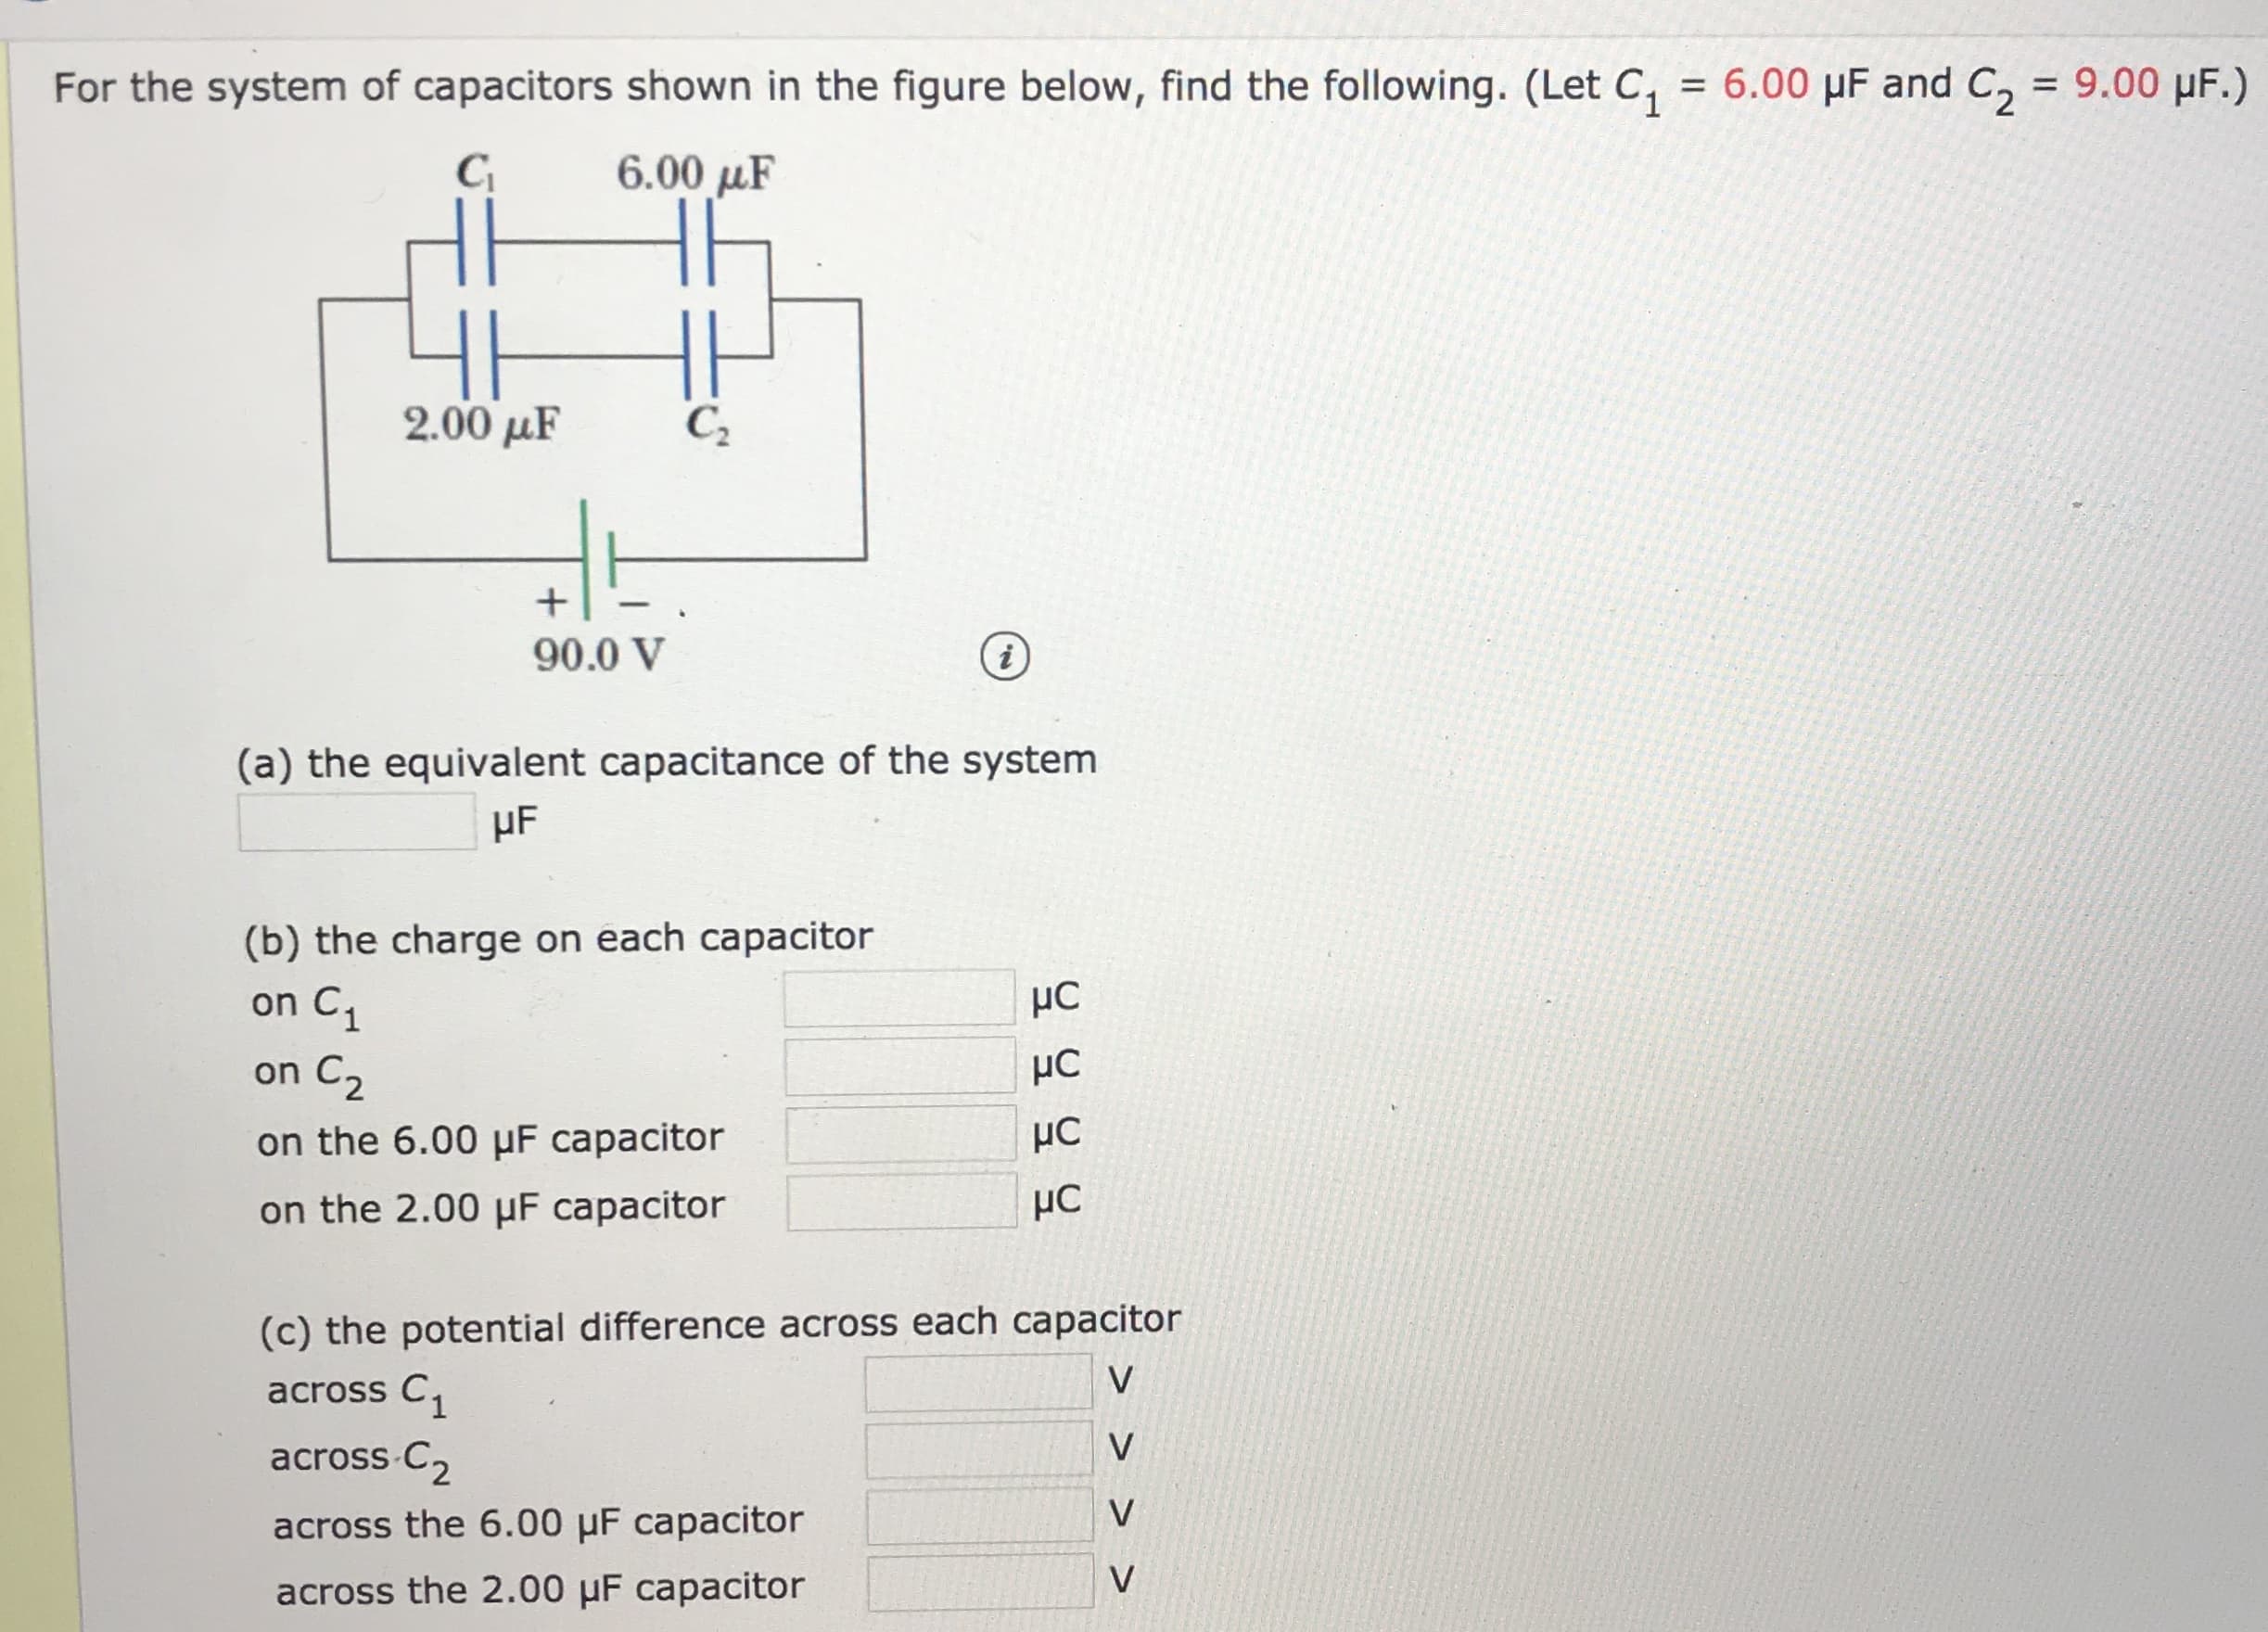 9.00 HF.)
For the system of capacitors shown in the figure below, find the following. (Let C
6.00 uF and C
6.00 uF
CA
2.00 uF
C2
+
90.0 V
i
(a) the equivalent capacitance of the system
HF
(b) the charge on each capacitor
on C1
C2
on
μC
on the 6.00 HF capacitor
on the 2.00 HF capacitor
(c) the potential difference across each capacitor
V
across C
V
across C2
V
across the 6.00 HF capacitor
across the 2.00 HF capacitor
